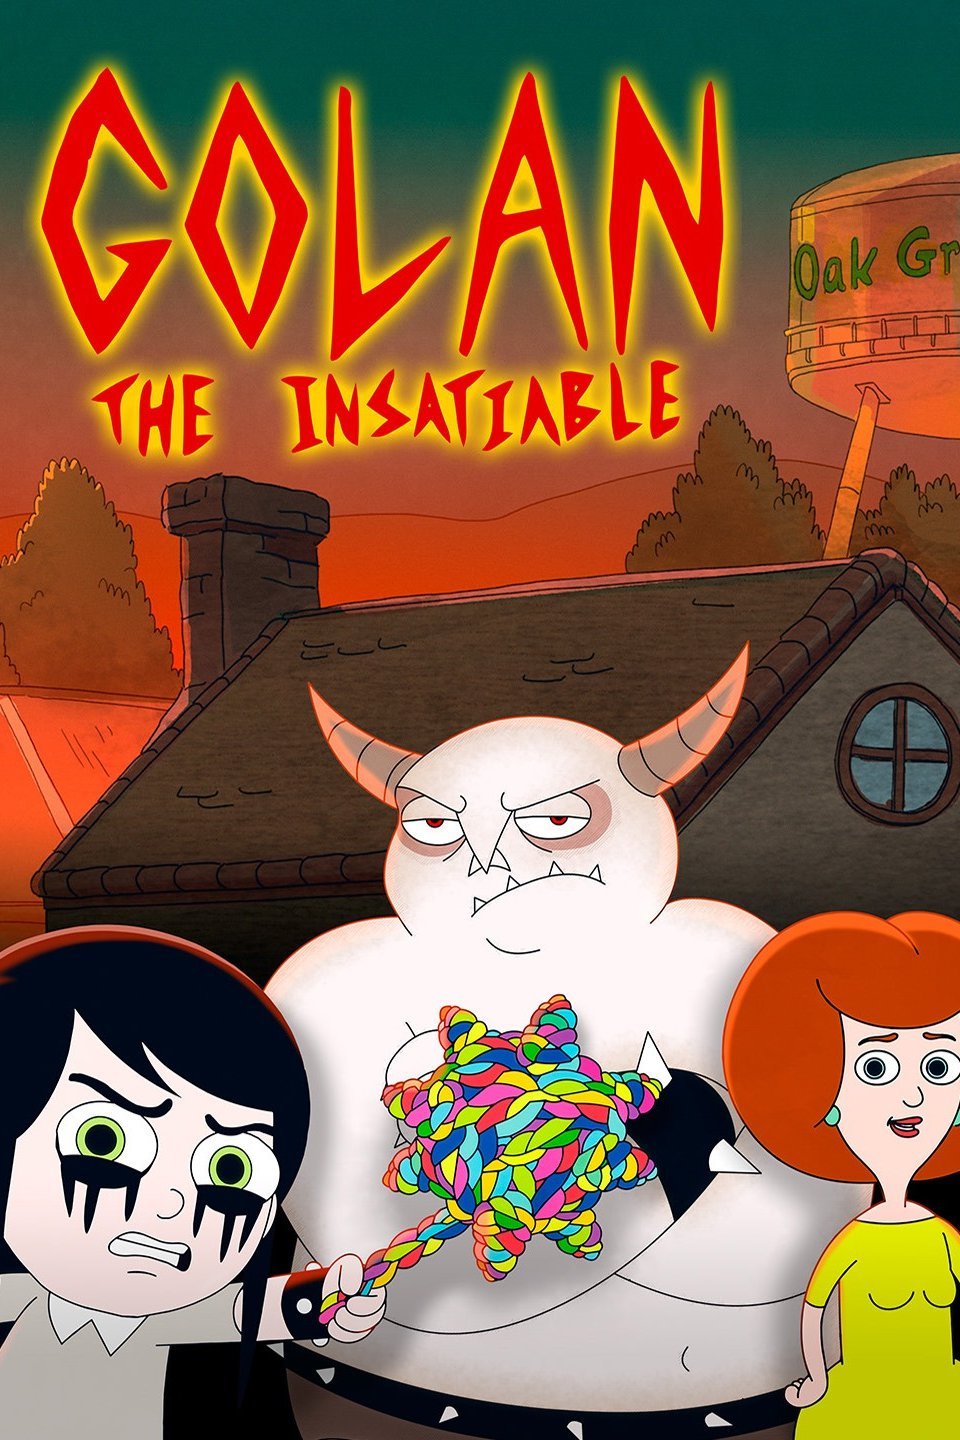 Golan The Insatiable Wallpapers